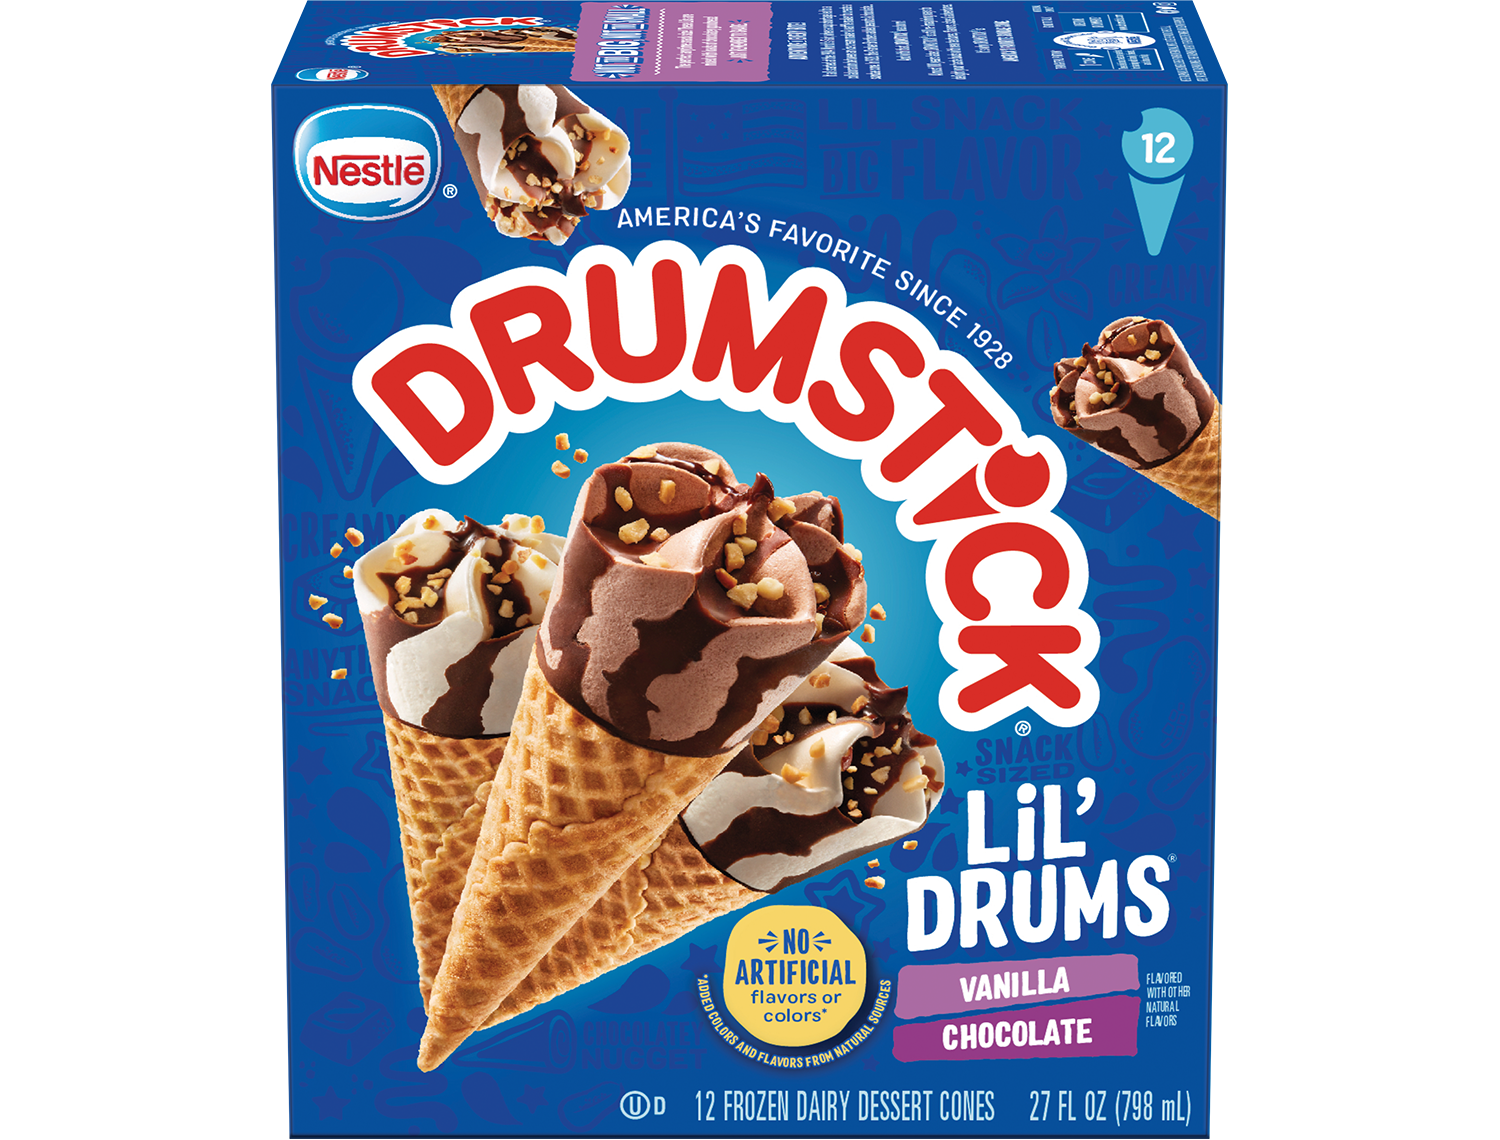 A box of 12 Drumstick Lil' Drums snack-size Vanilla and Chocolate cones